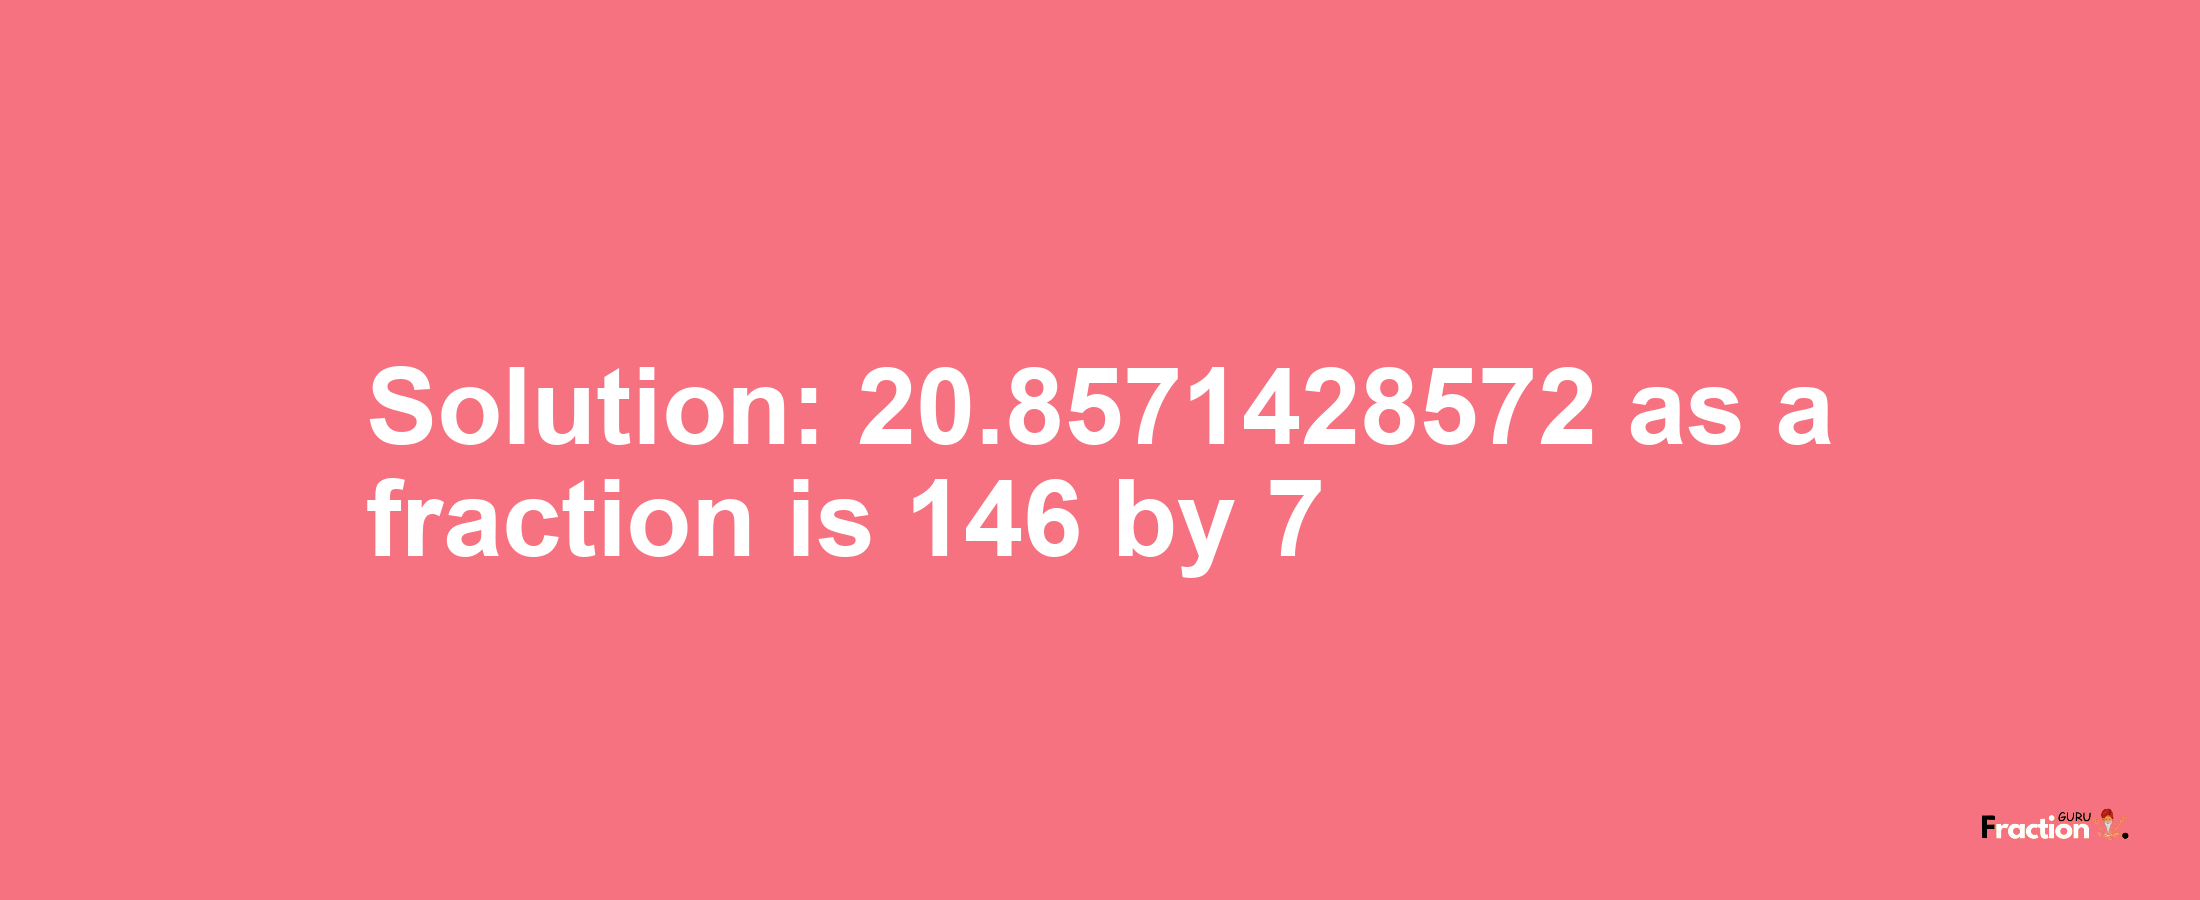 Solution:20.8571428572 as a fraction is 146/7